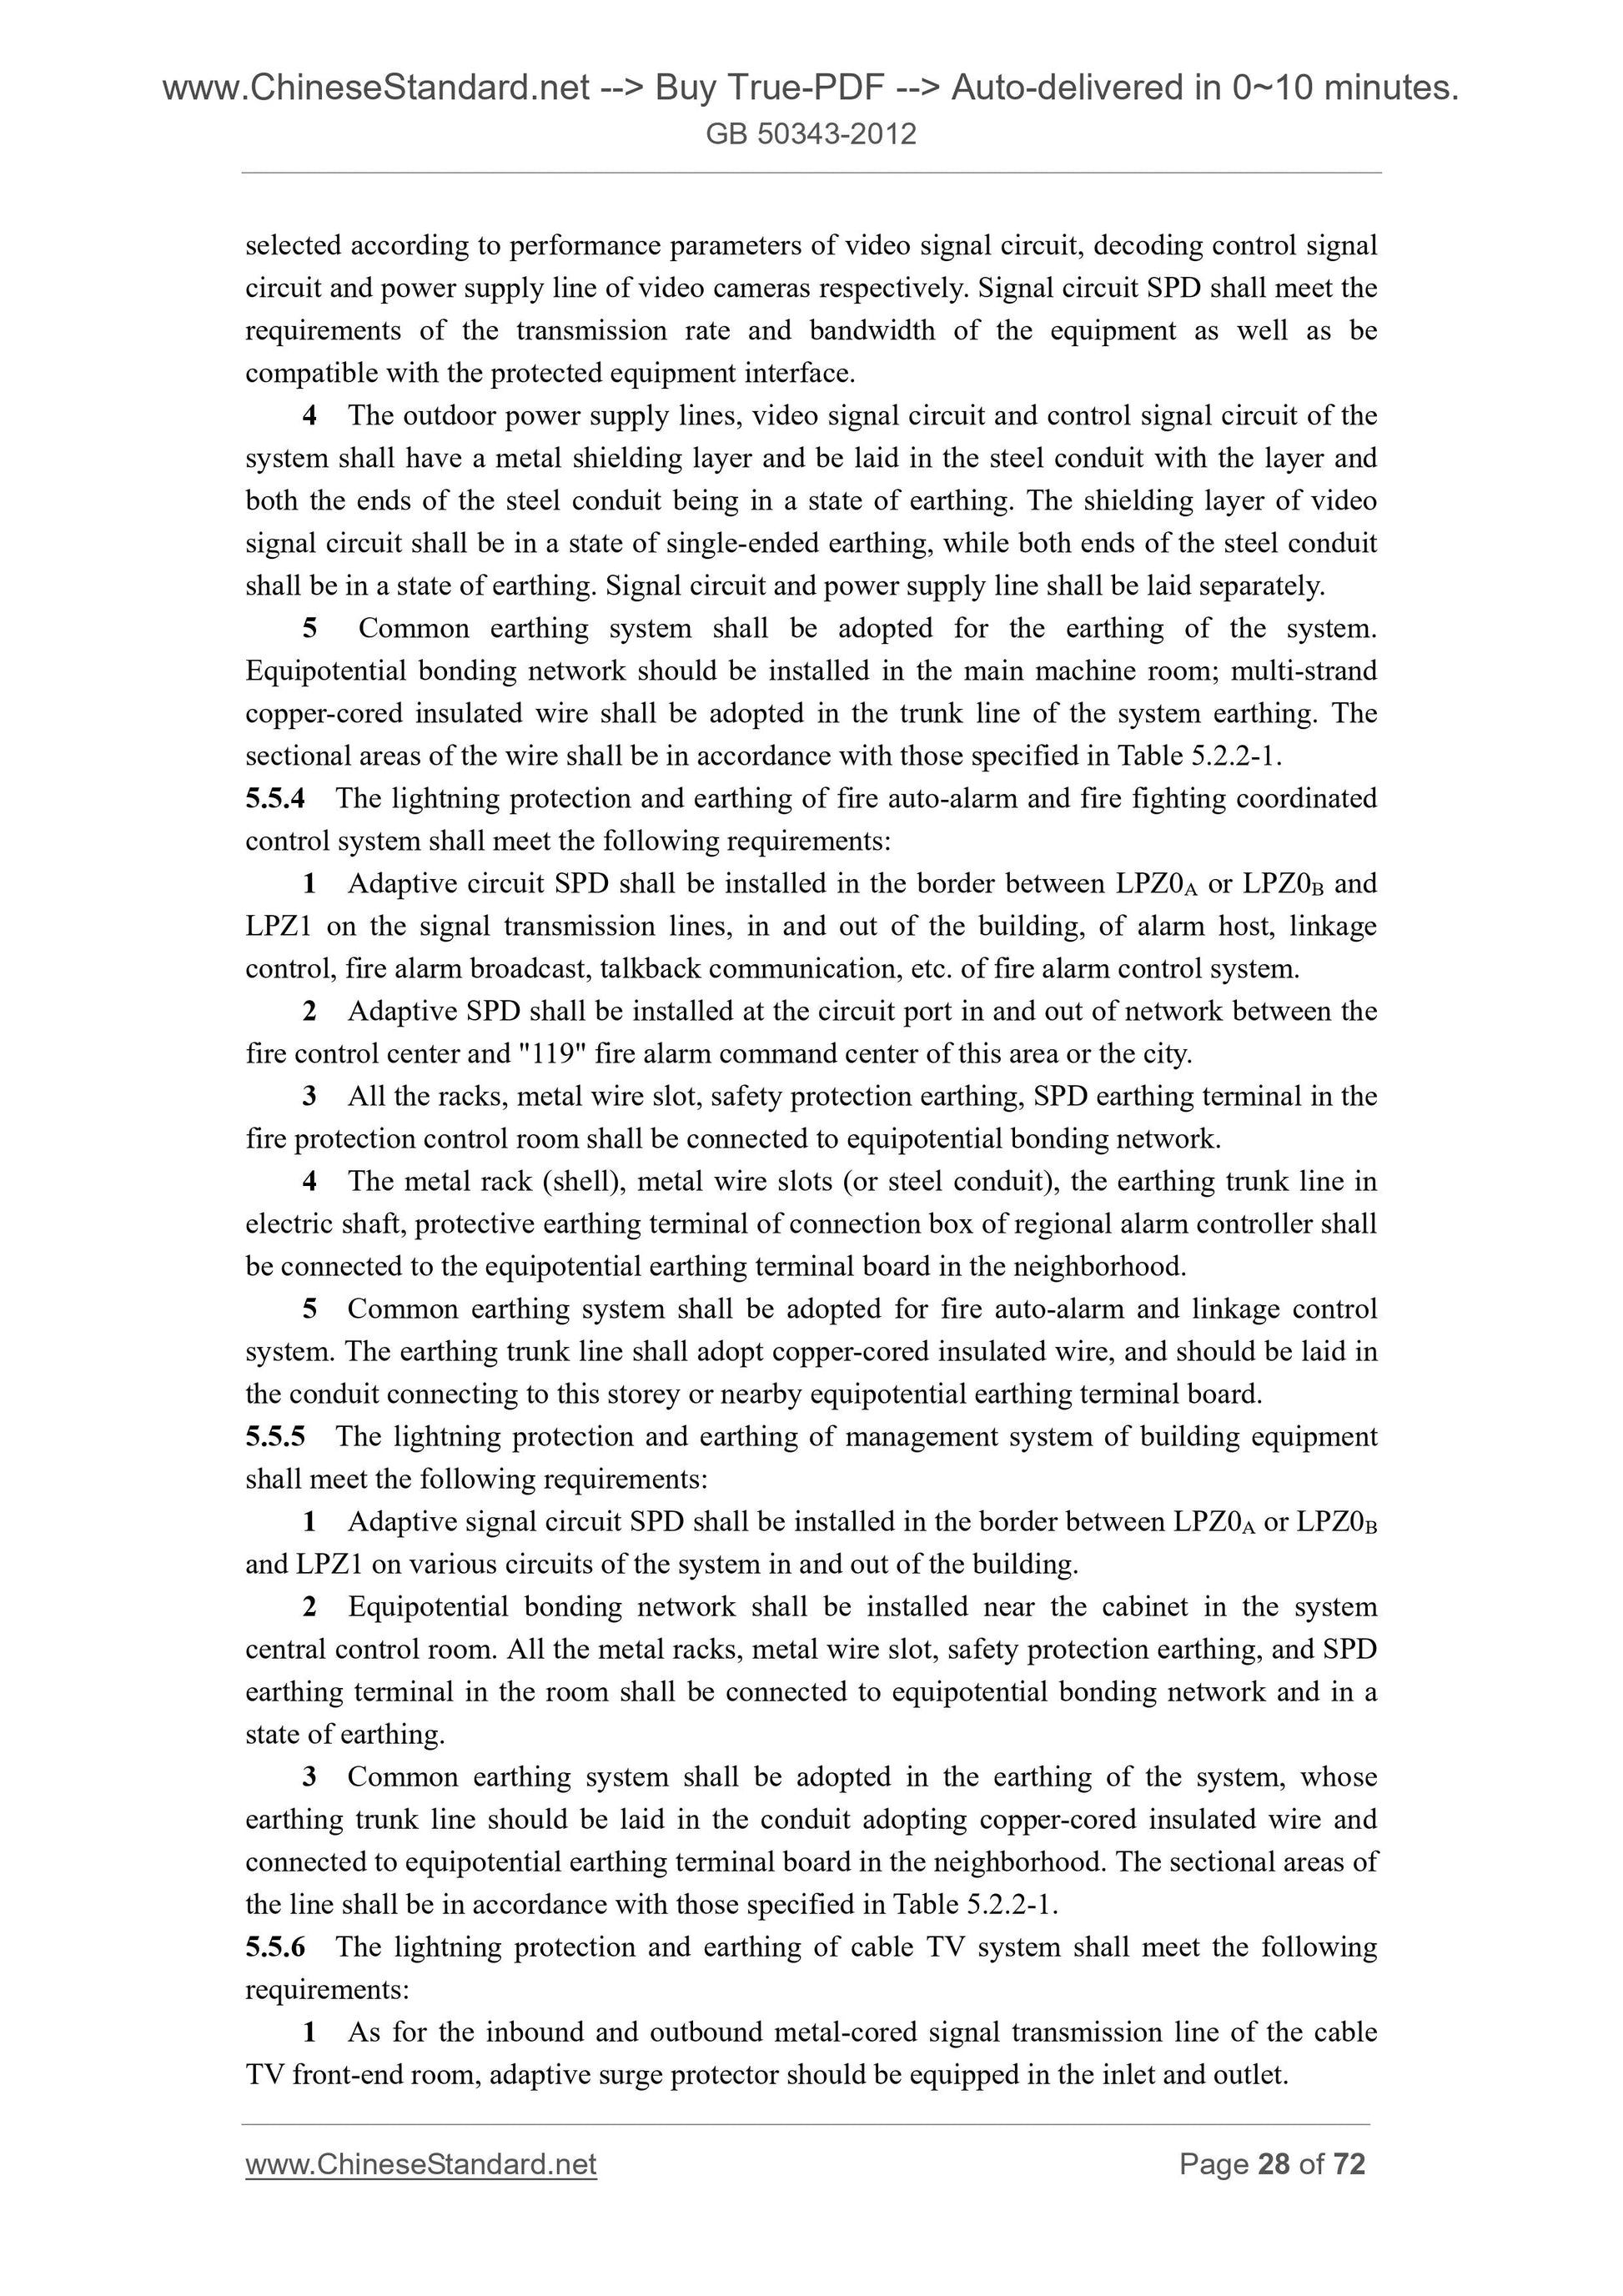 GB 50343-2012 Page 12